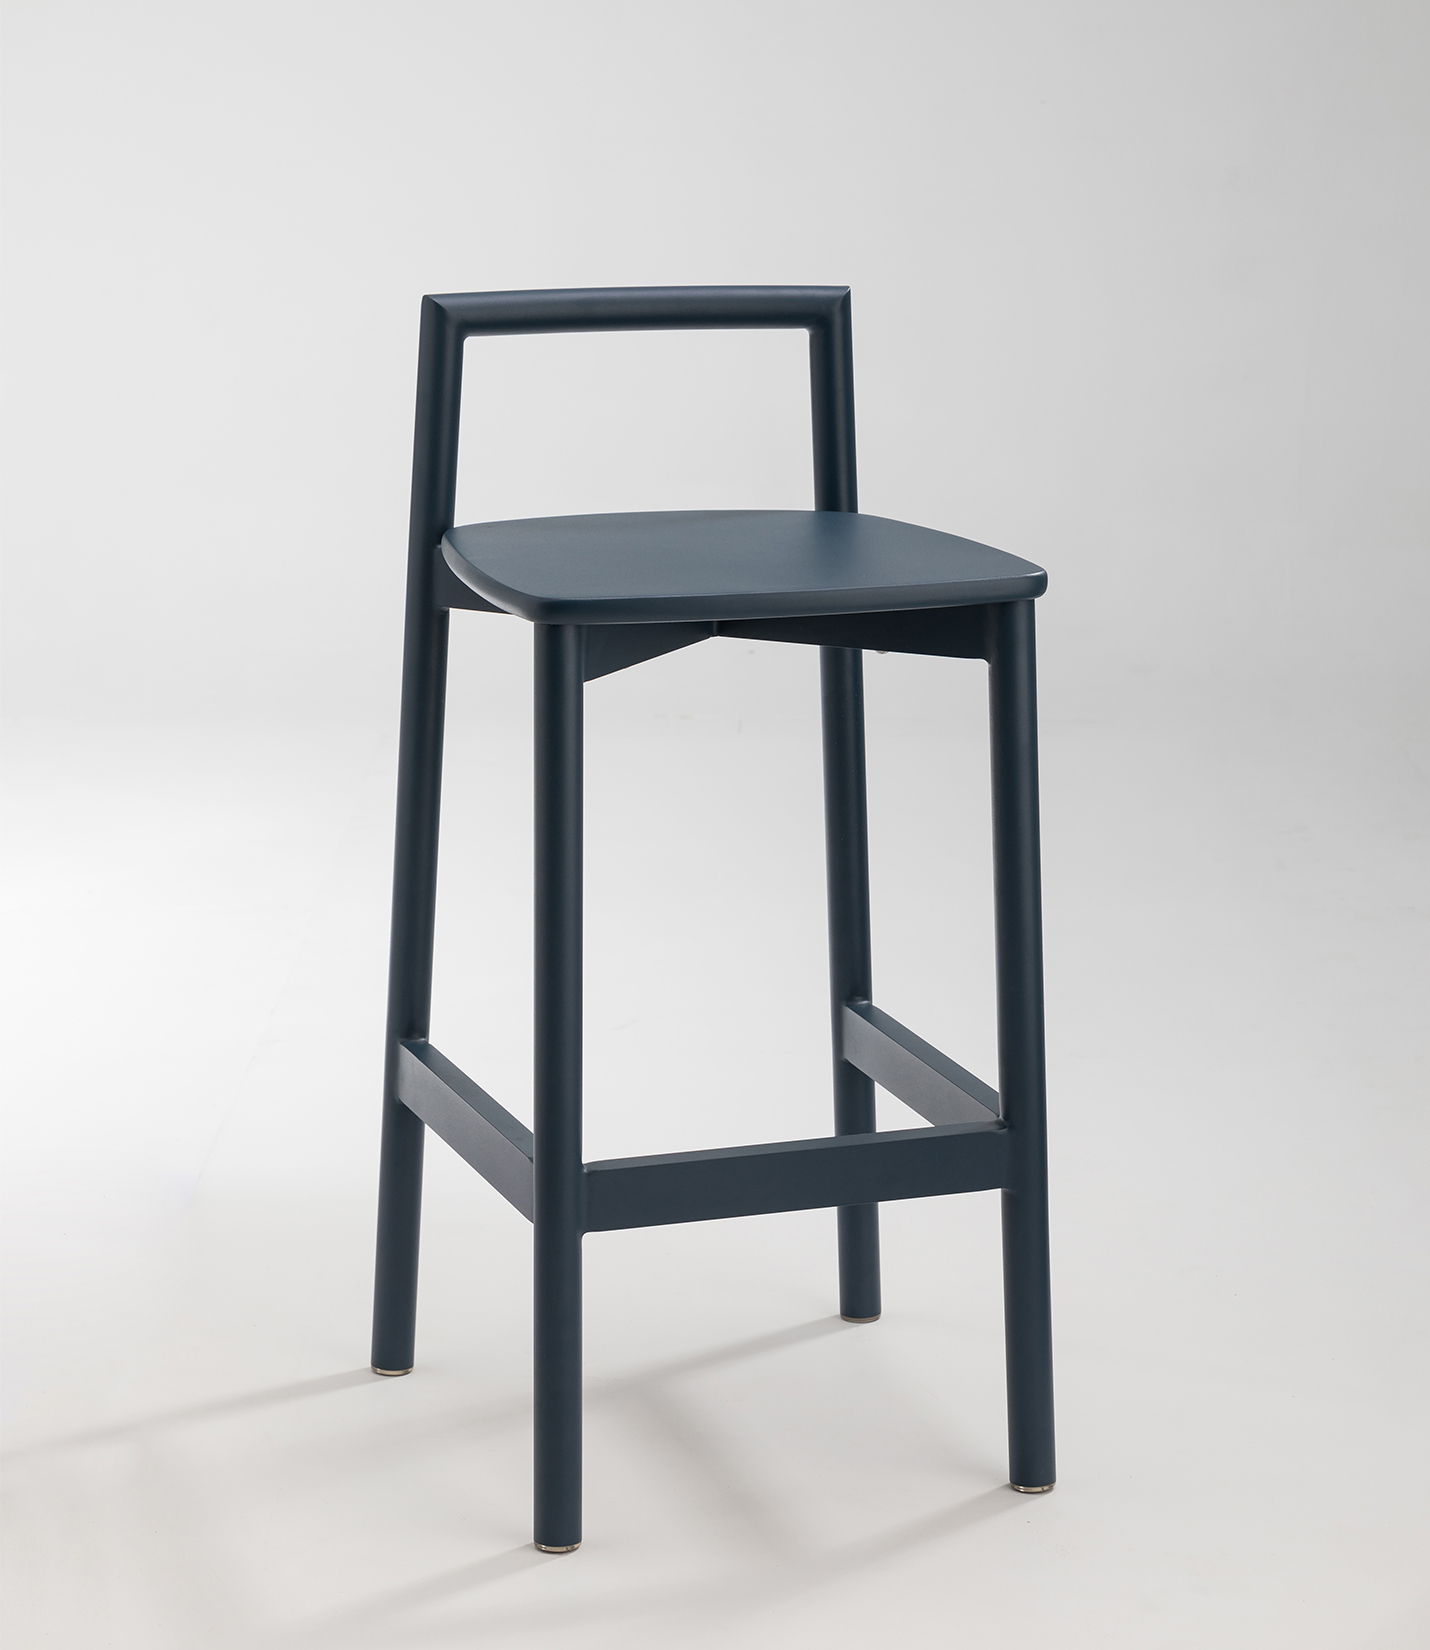 Fable Outdoor Bar Stool